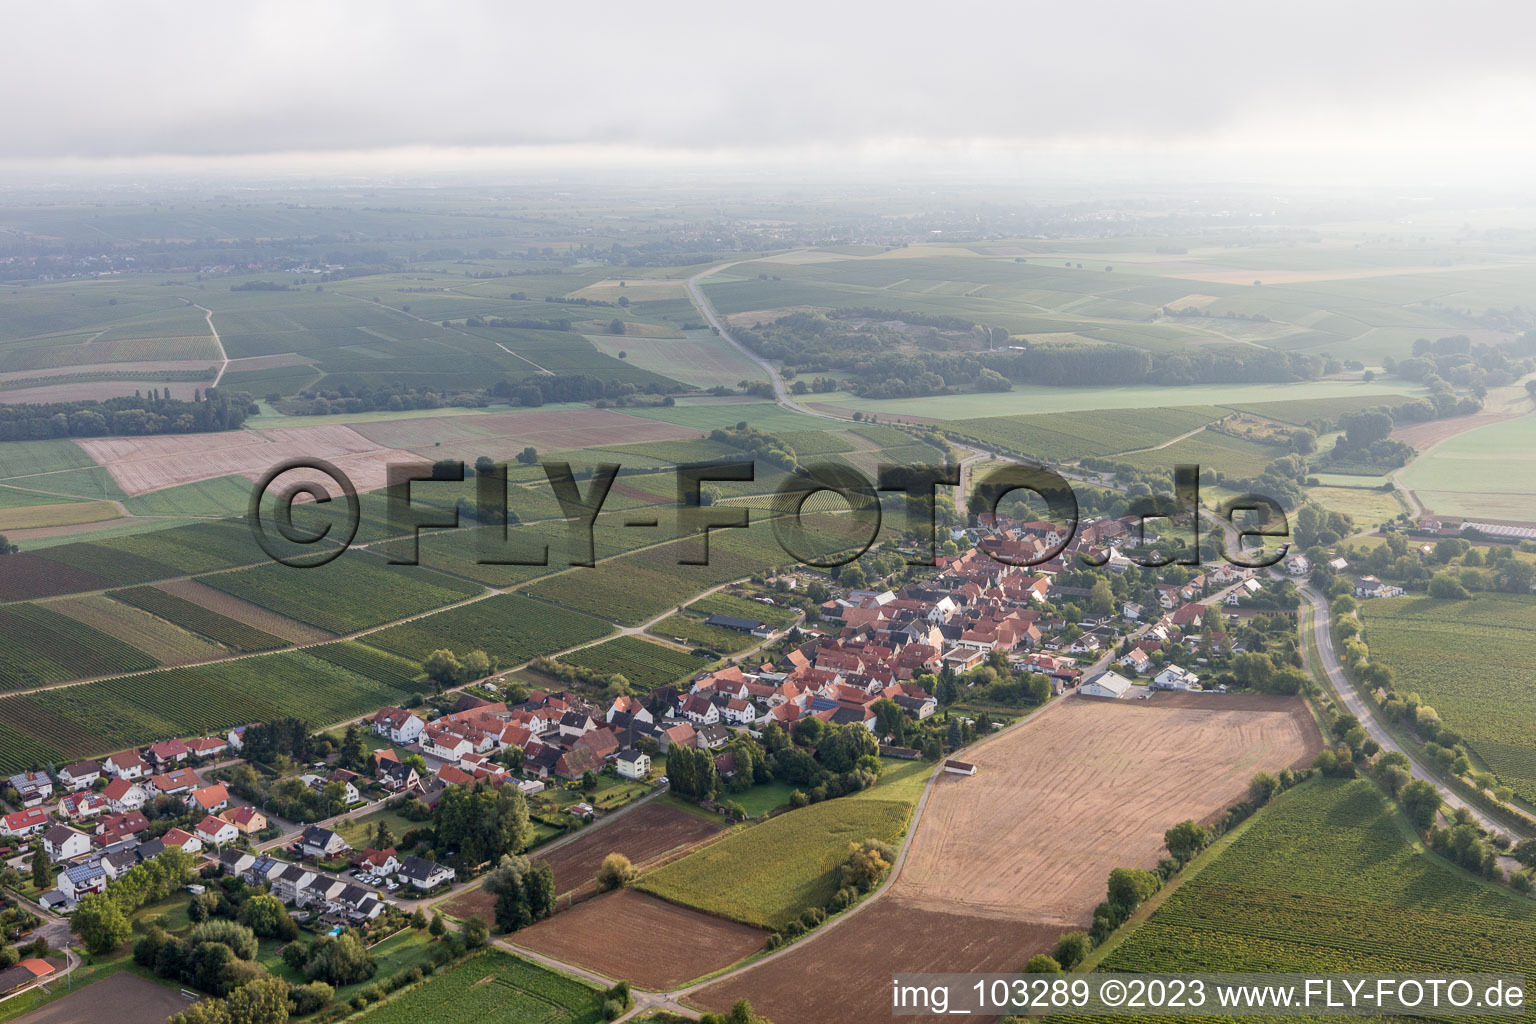 Niederhorbach in the state Rhineland-Palatinate, Germany from above